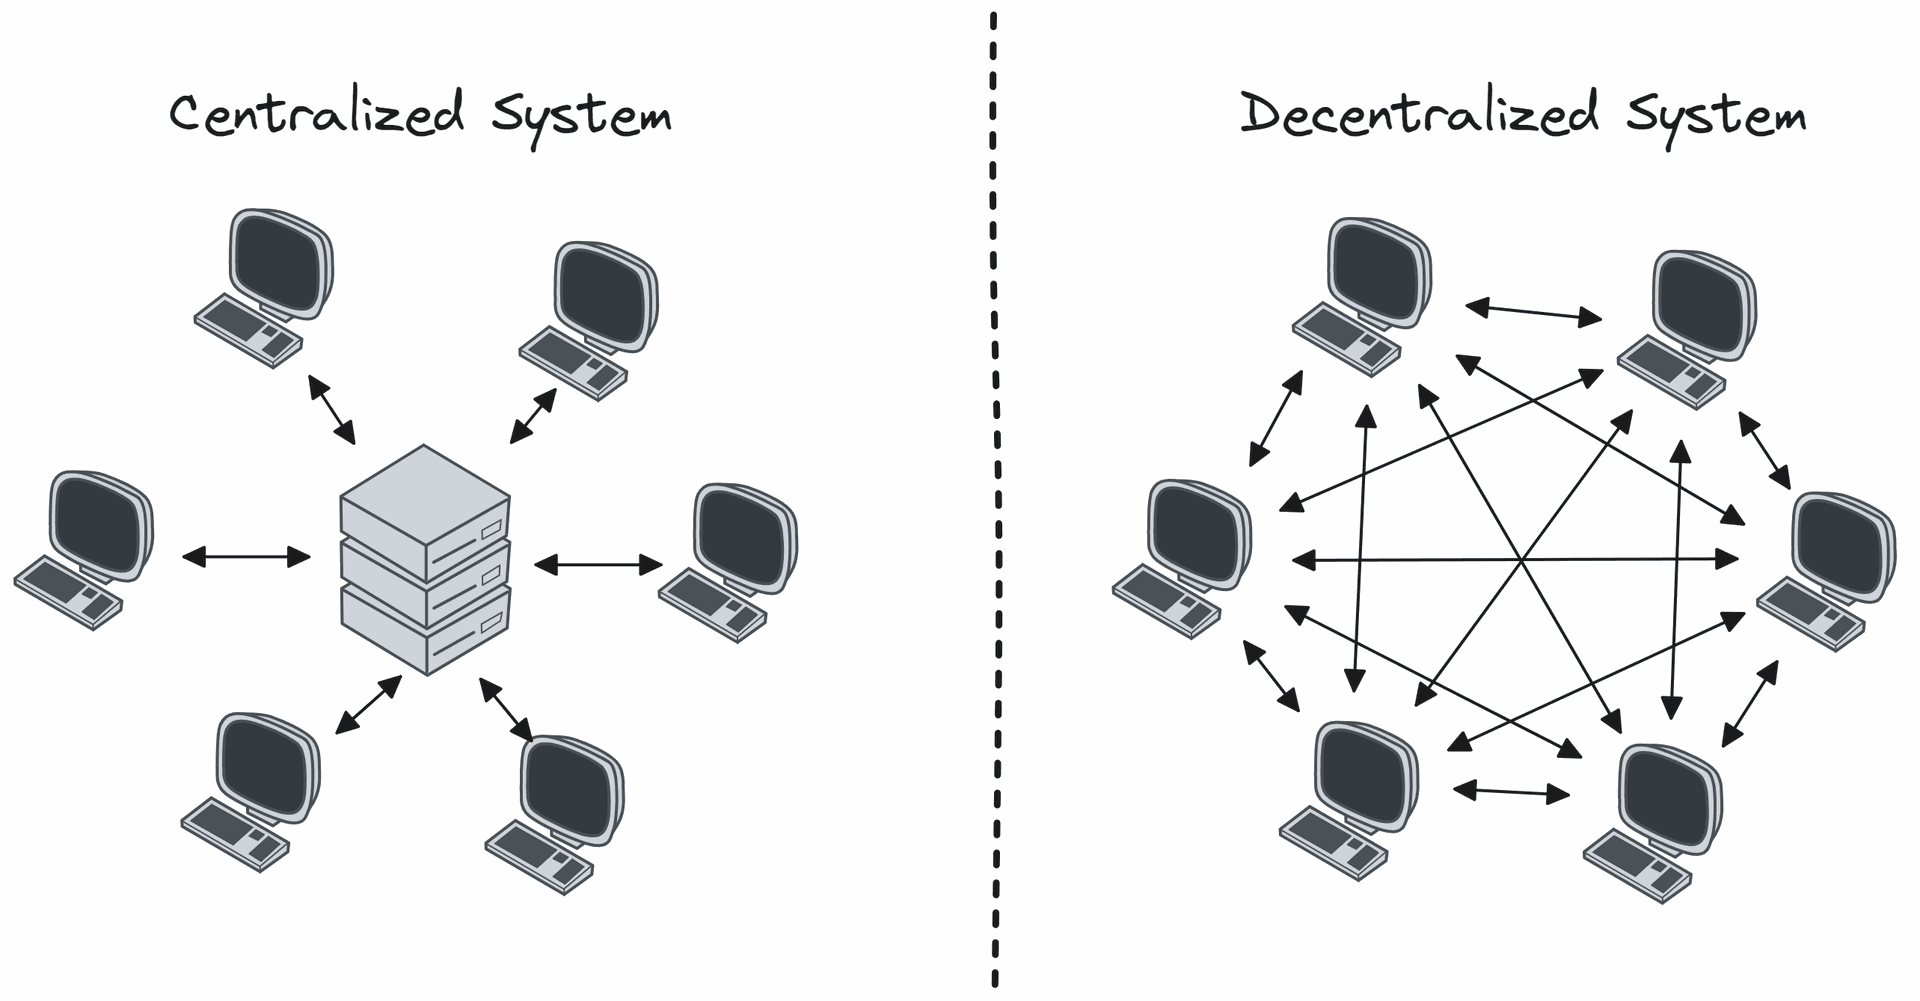 A diagram that demonstrates the difference between a centralized and decentralized system